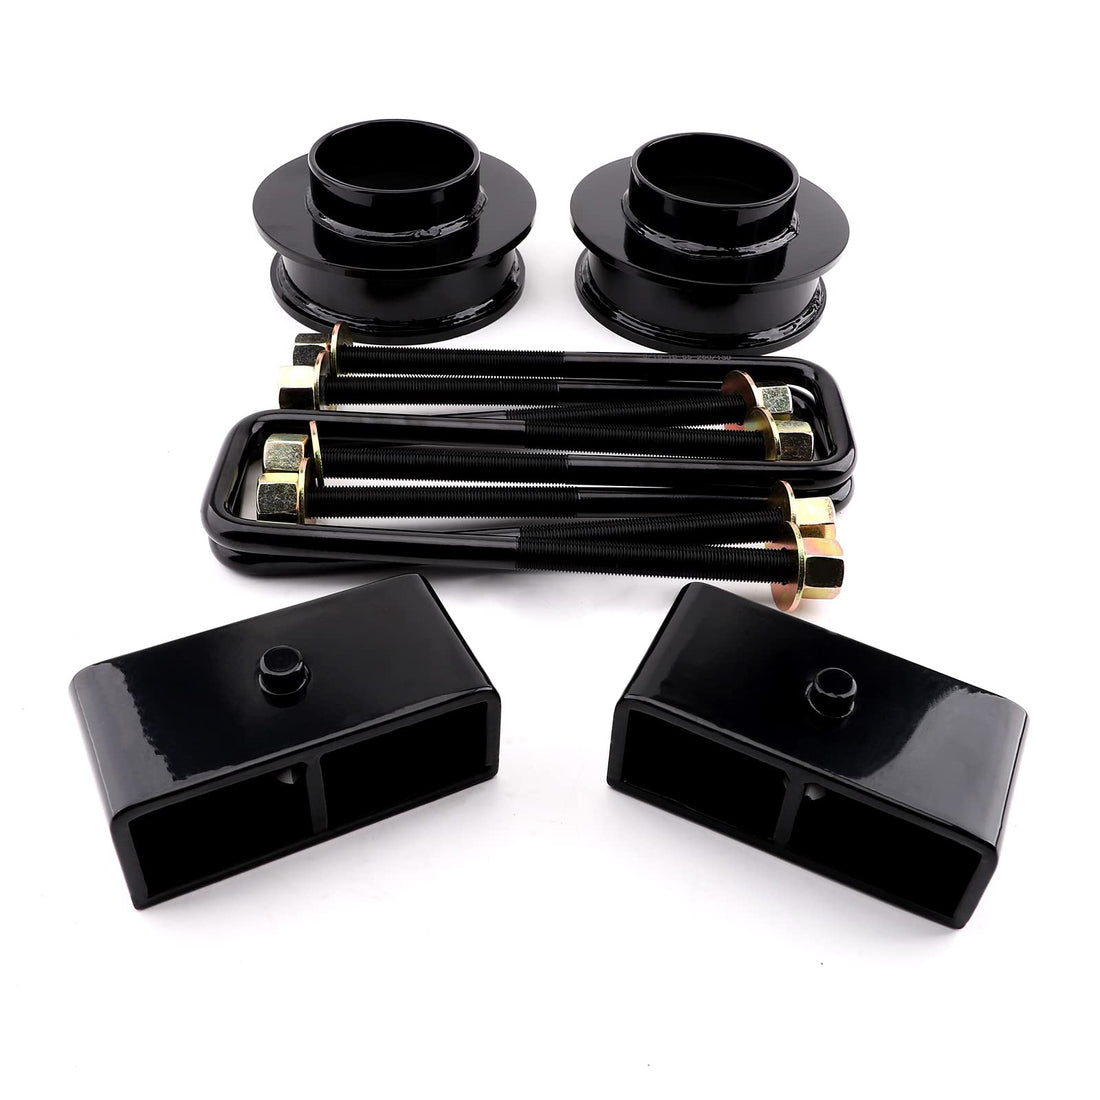 GARVEE 3 Inch Front & 2 Inch Rear Leveling Lift Kits T6 Aircraft Billet Strut Spacers Lift Blocks